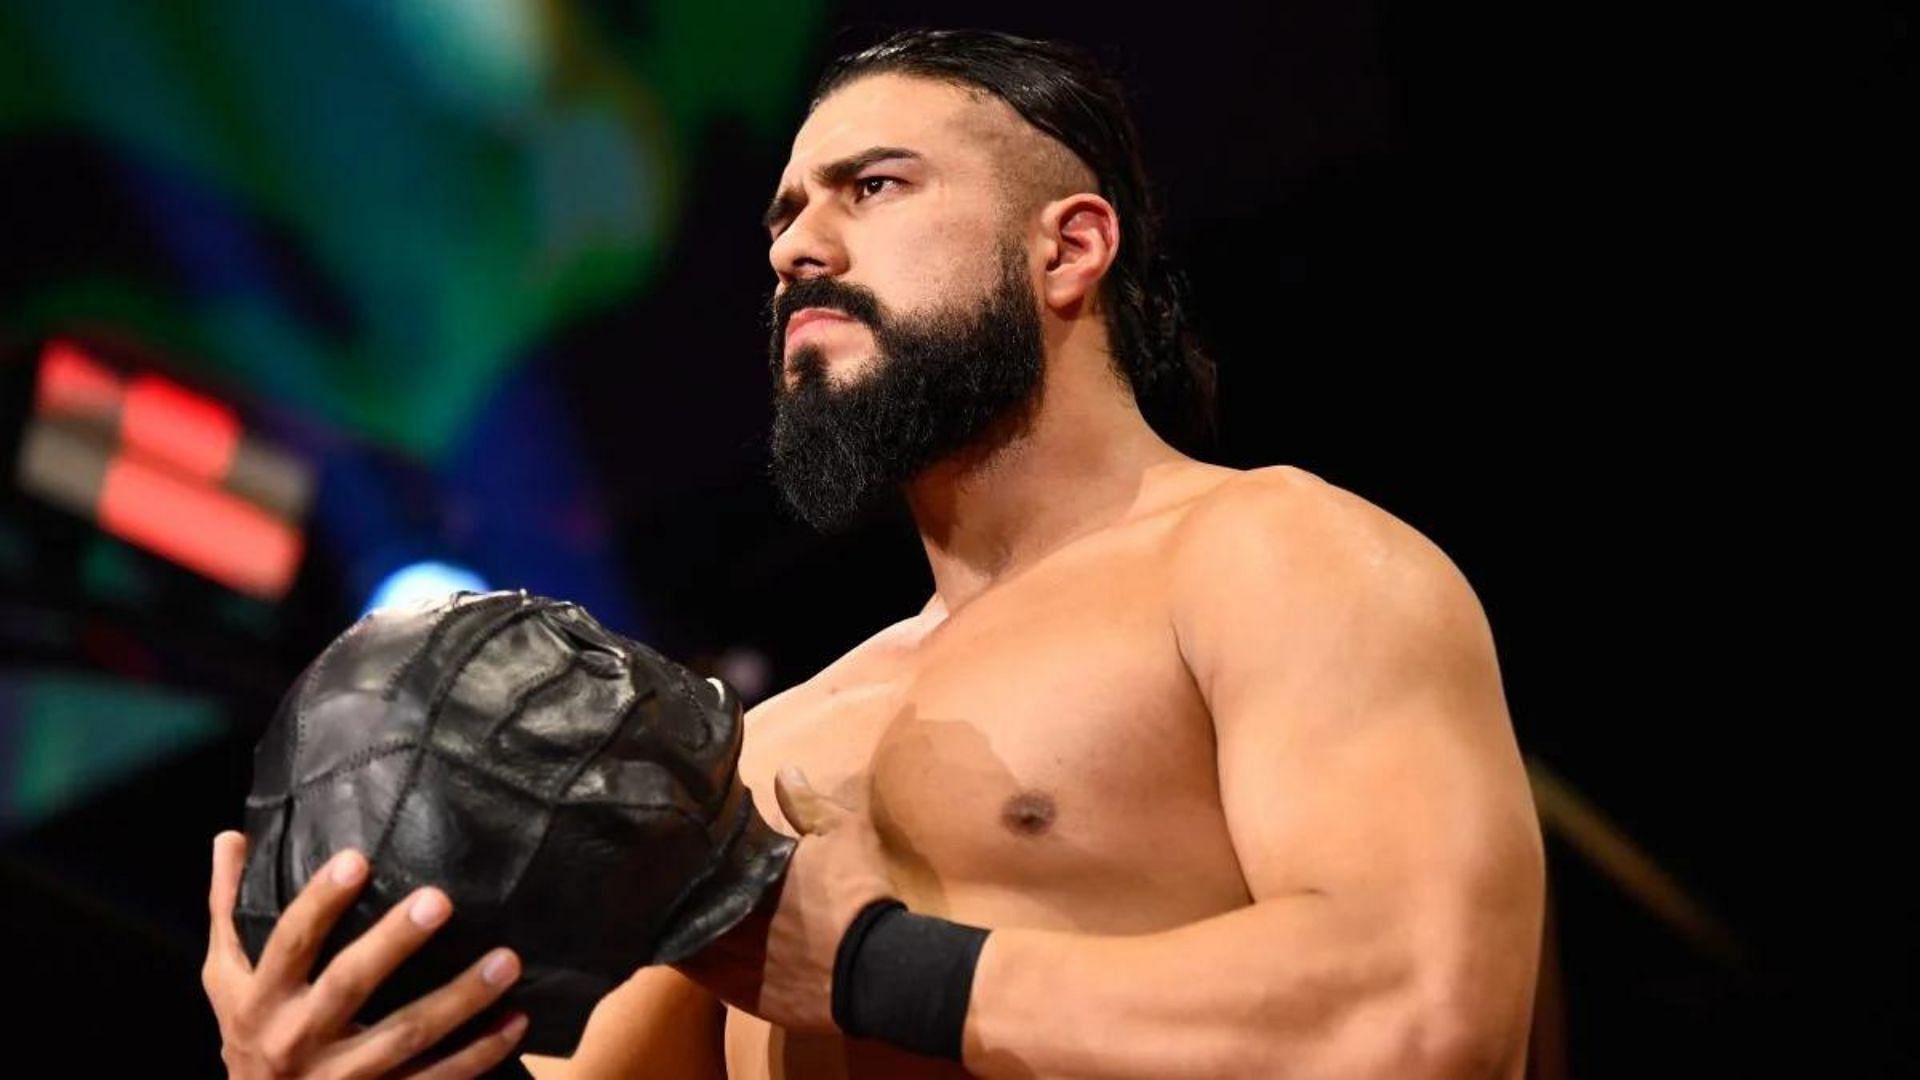 Andrade El Idolo is a former NXT Champion now with AEW